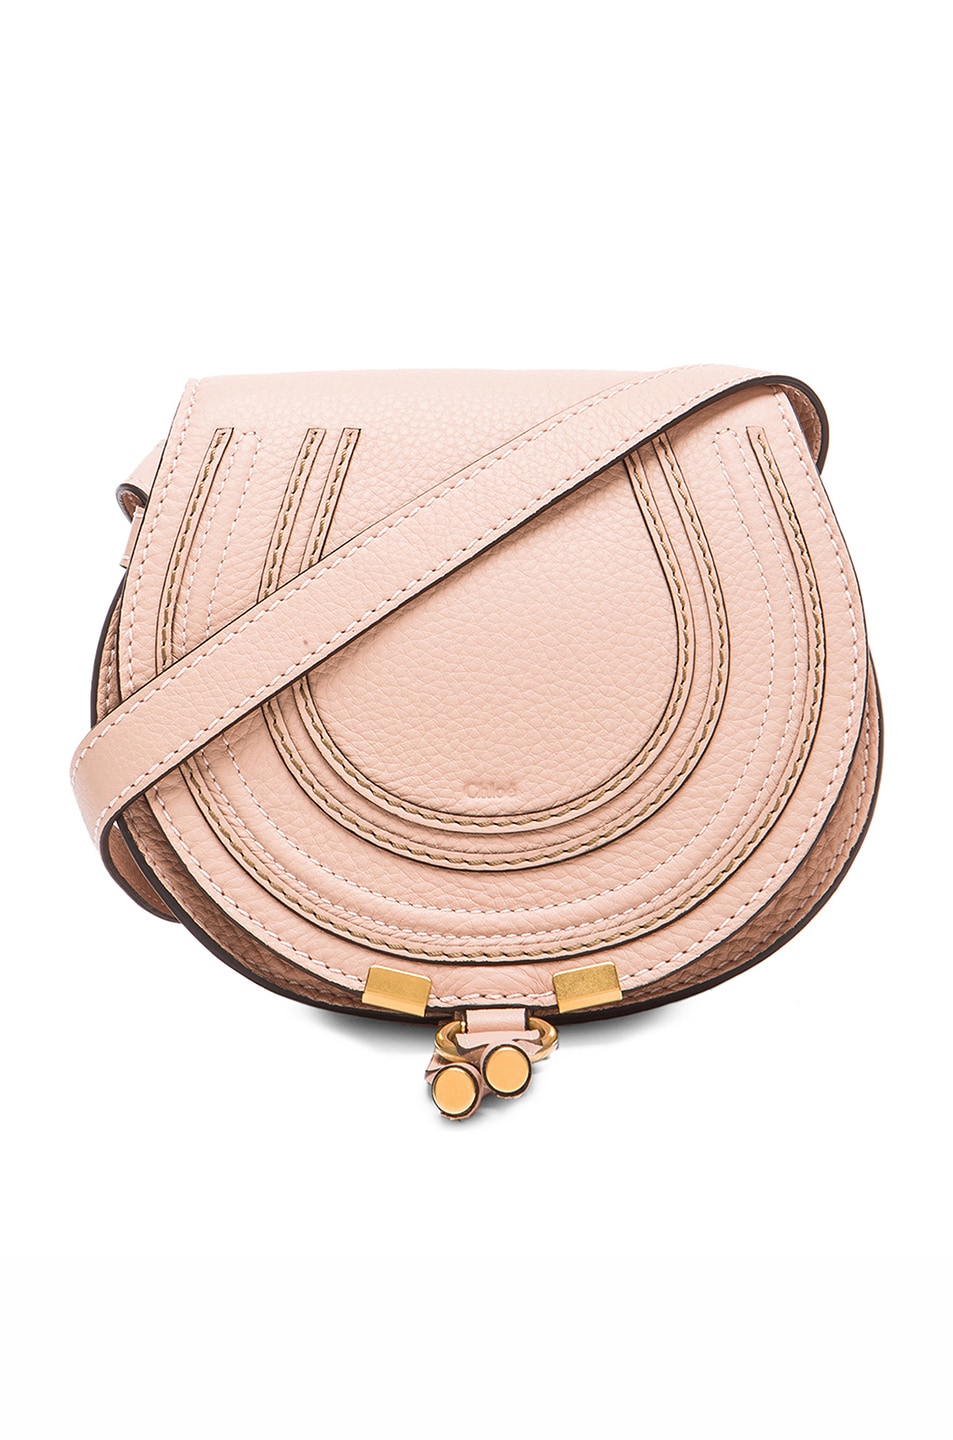 Image 1 of Chloe Small Marcie Grained Calfskin Saddle Bag in Blush Nude